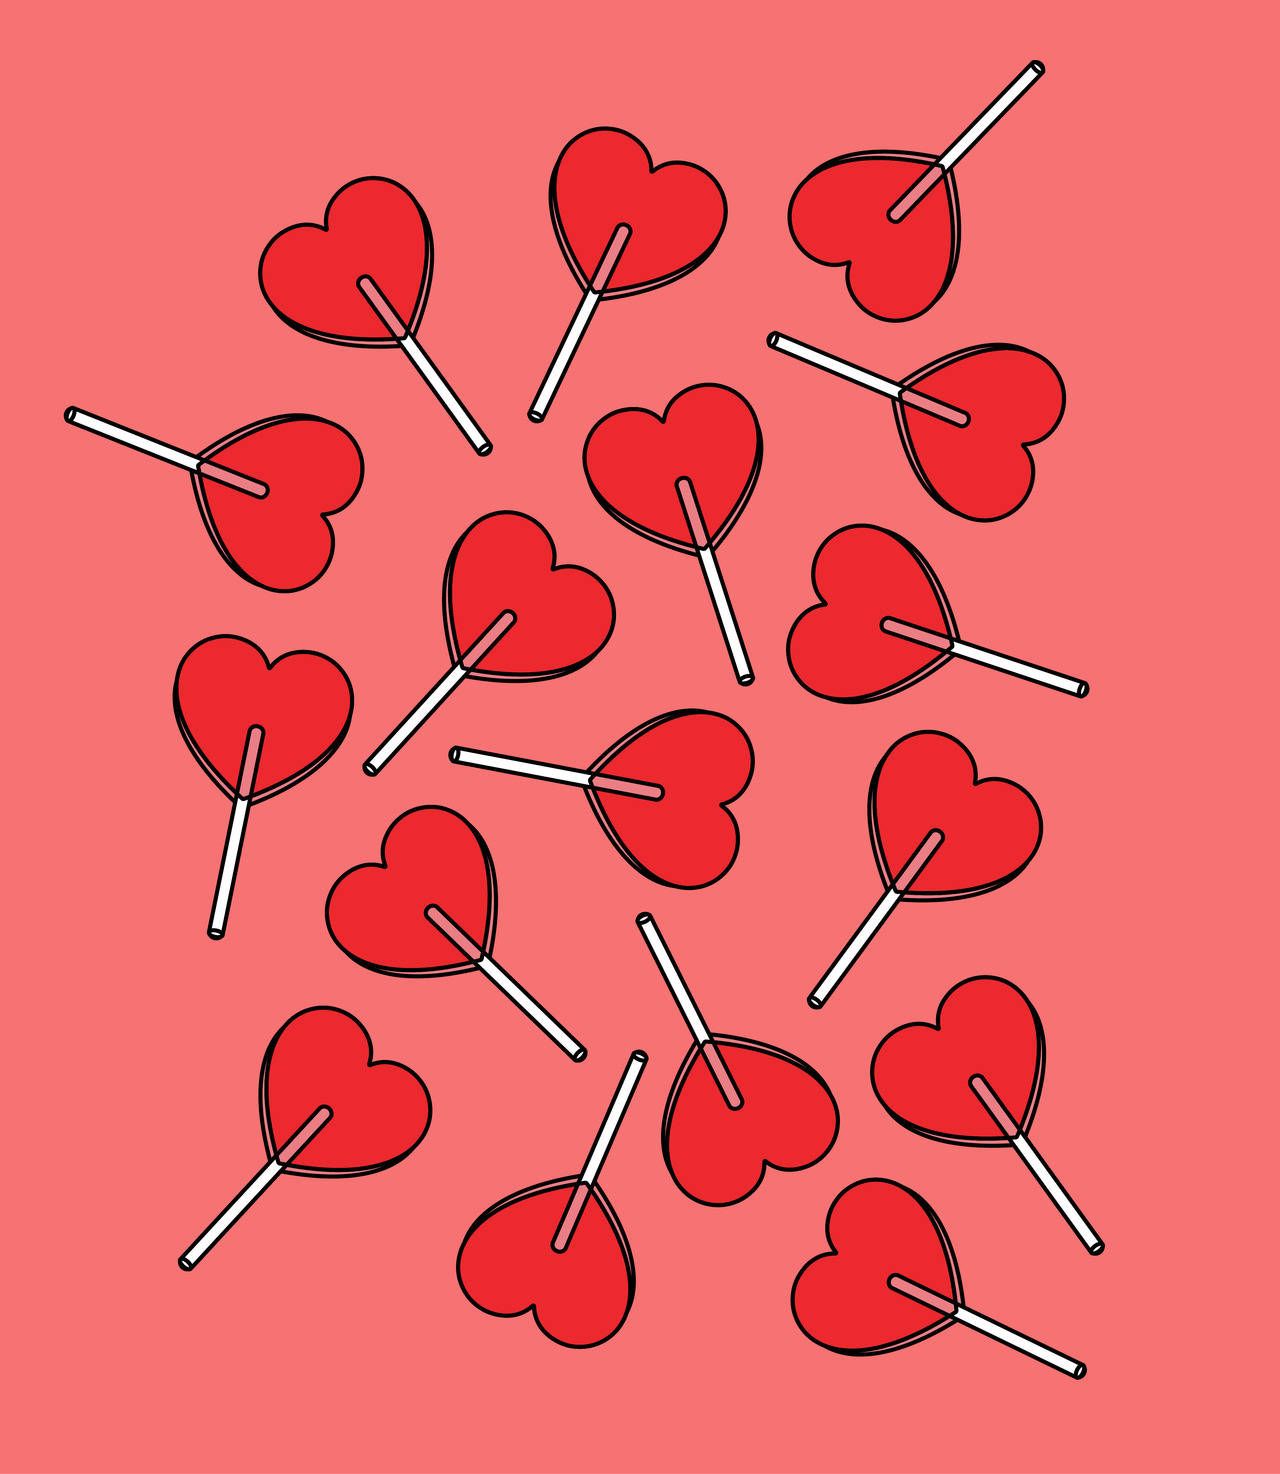 A pattern of red heart-shaped lollipops on a pink background - Valentine's Day, candy